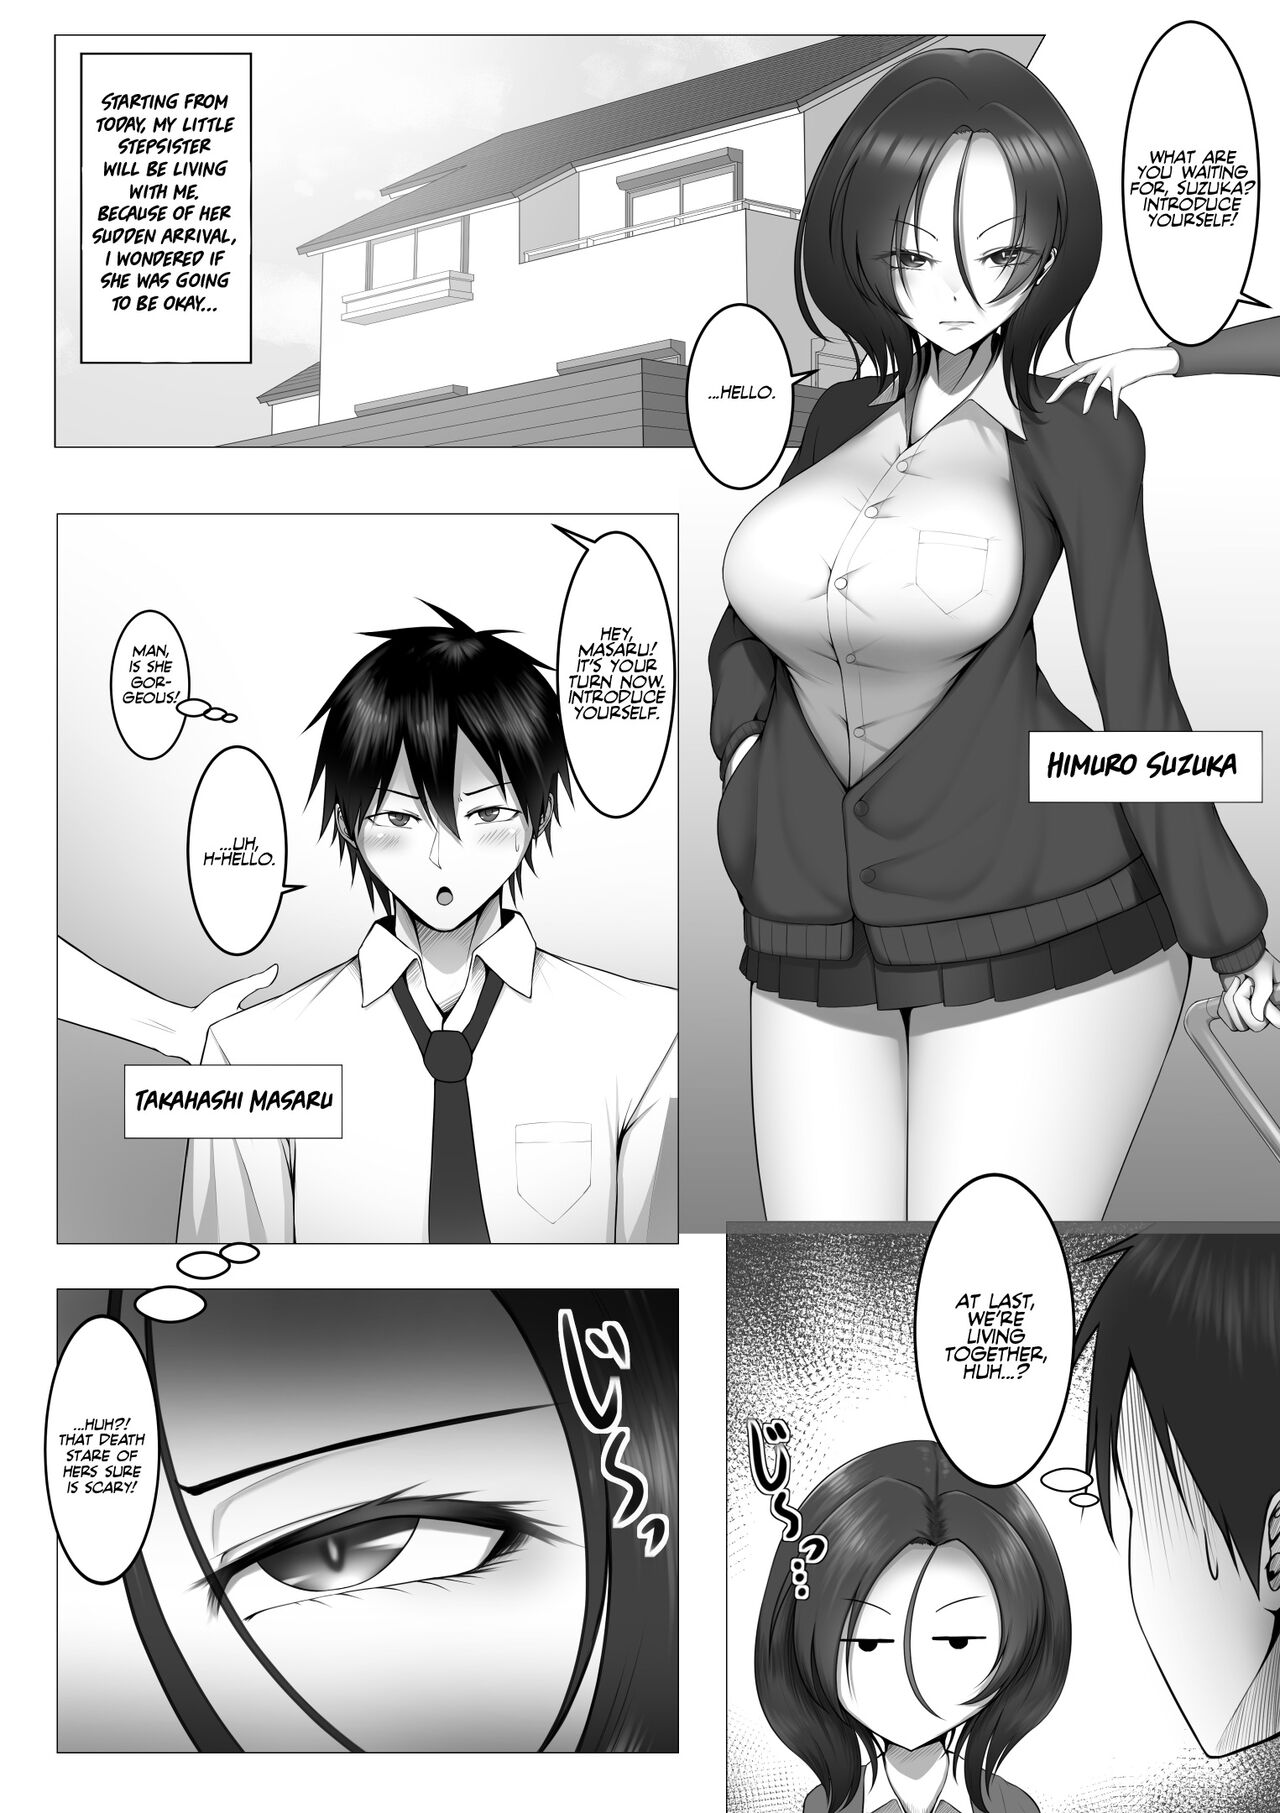 Hentai Manga Comic-My Emotionless Little Stepsister Makes Me Horny as Fuck!-Read-2